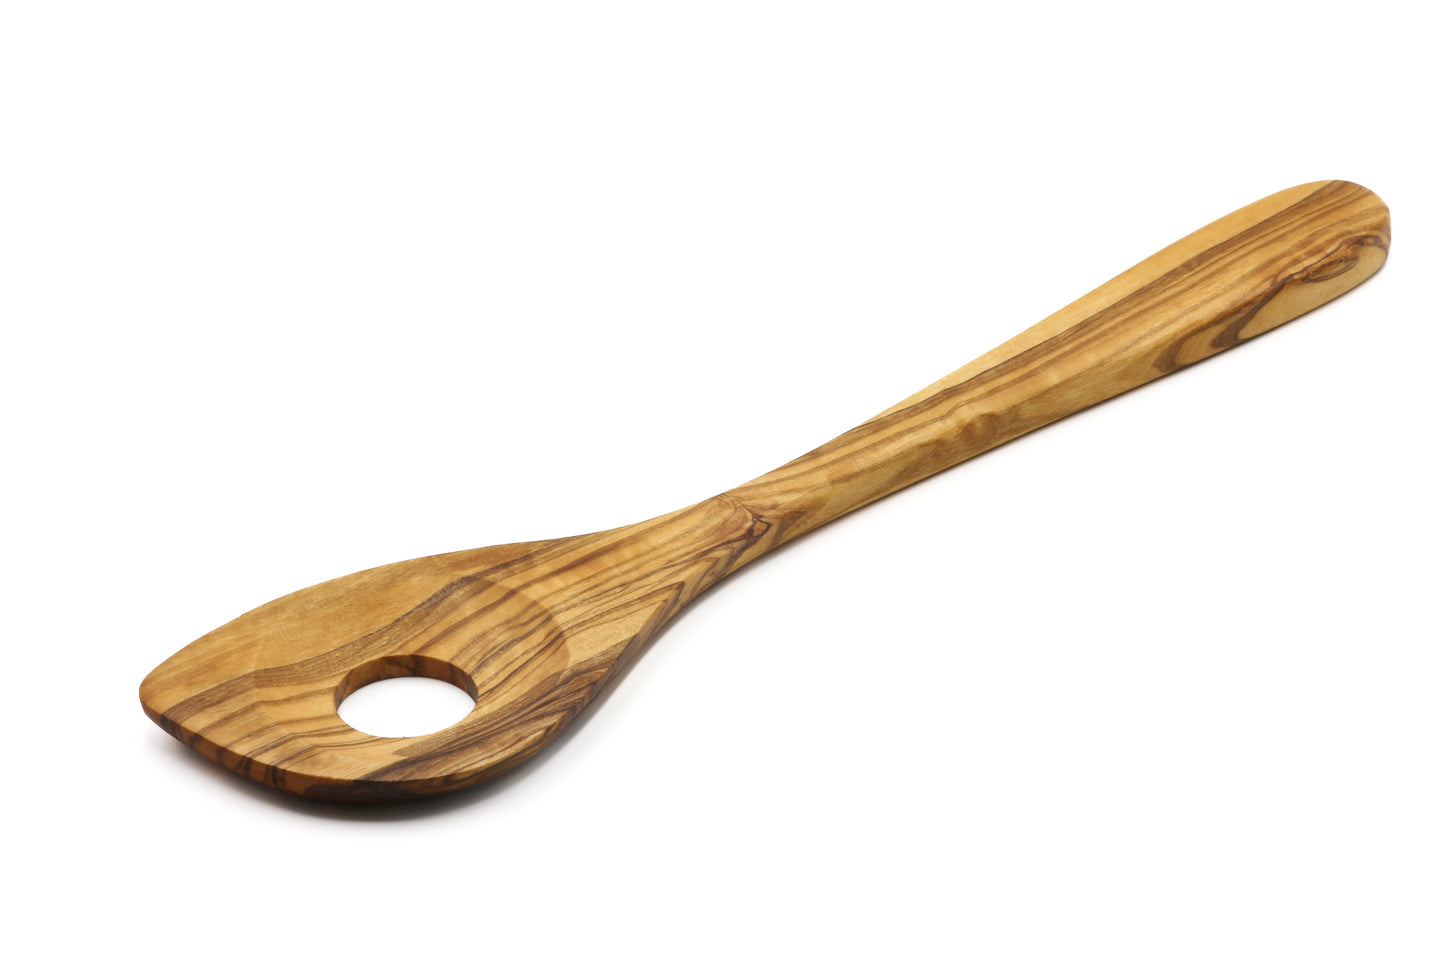 Olive wood stirring and mixing spoon with a central hole